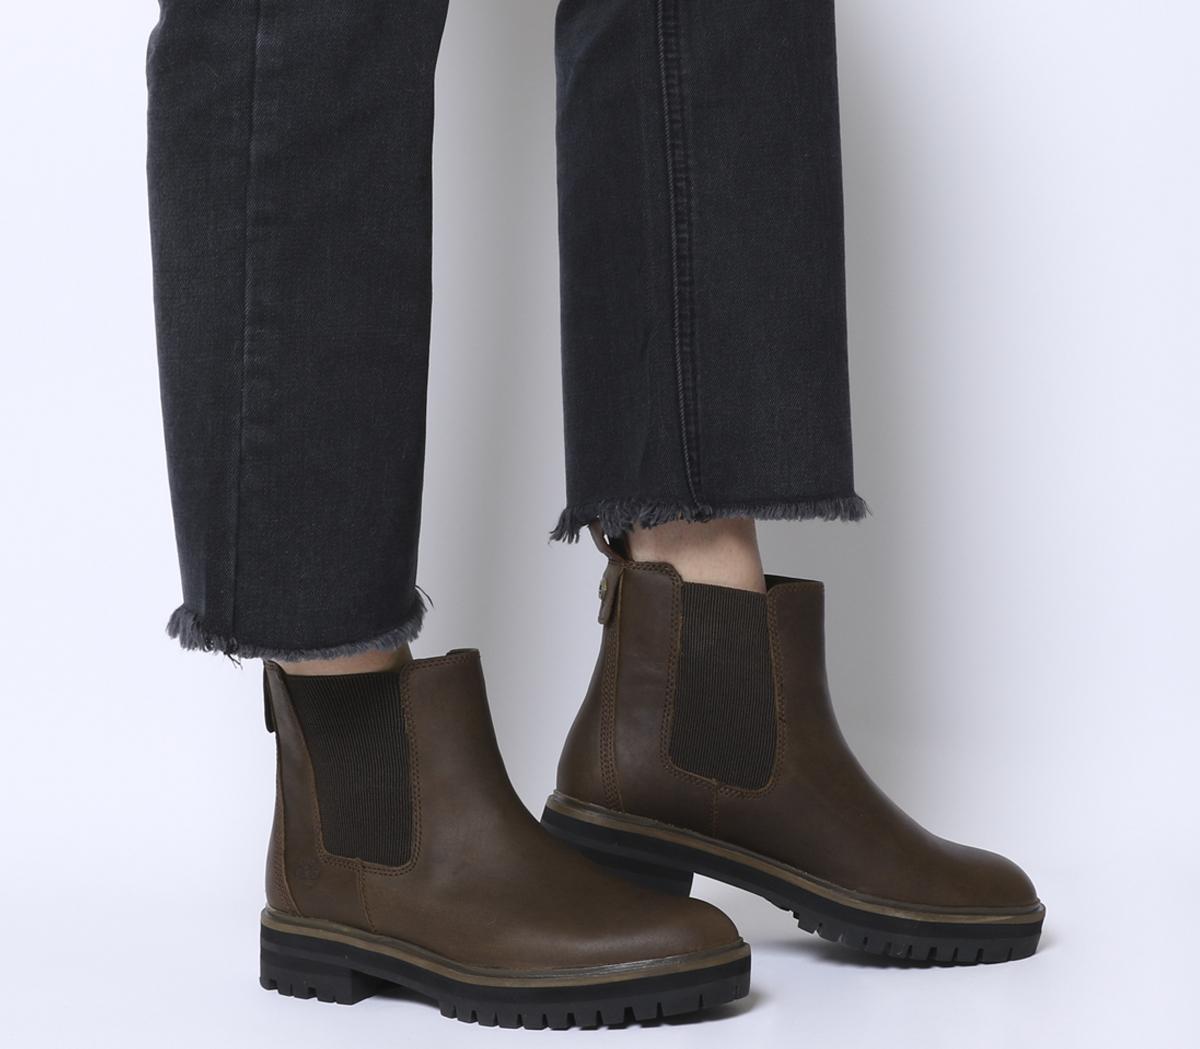 timberland womens chelsea boots